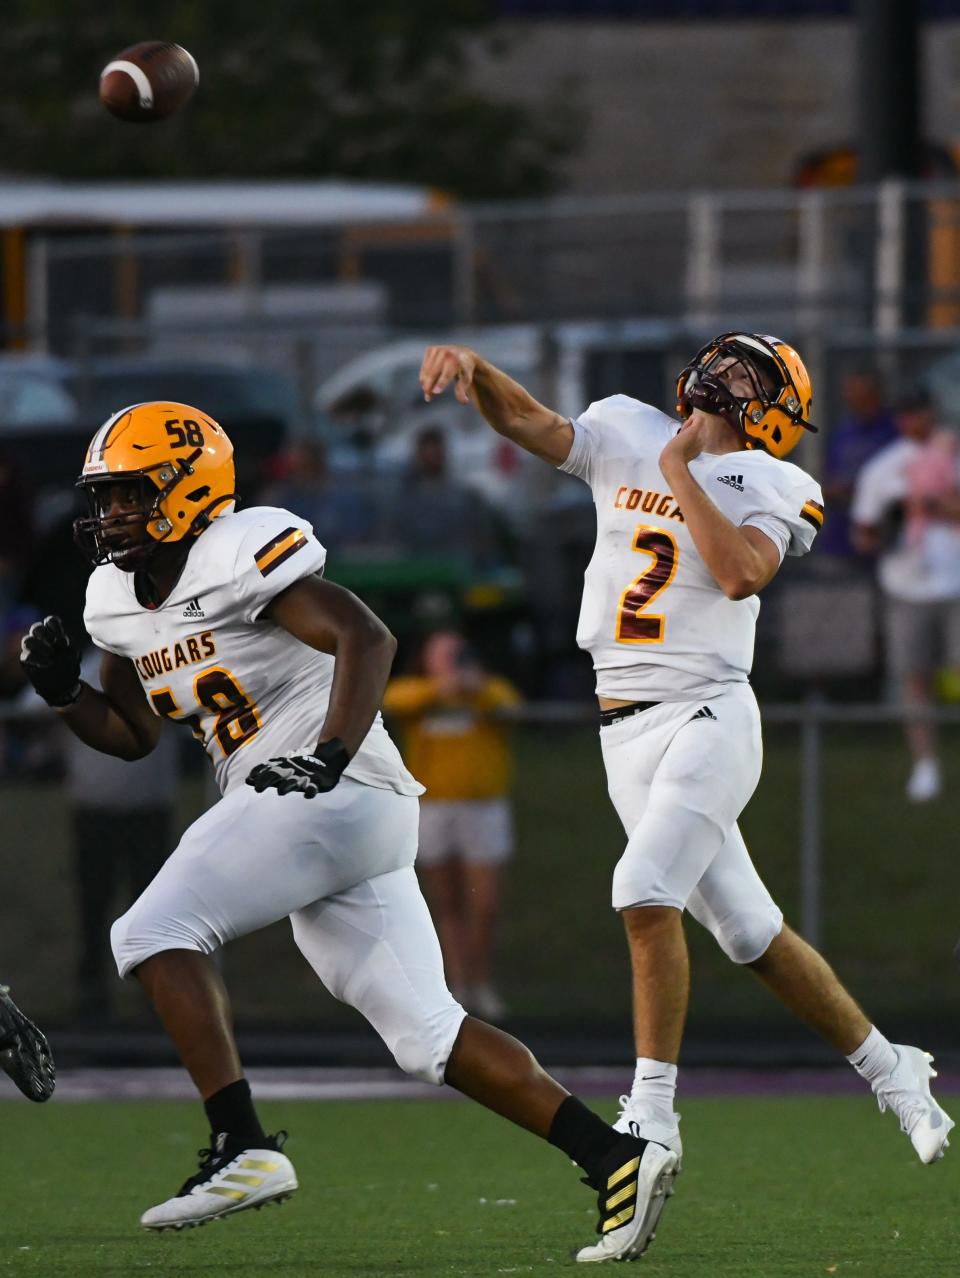 Bloomington North’s Dash King (2) throws a pass as Larry Staples (58) stays back for pass protection during the North-South football game at South on Friday, September 8, 2023.